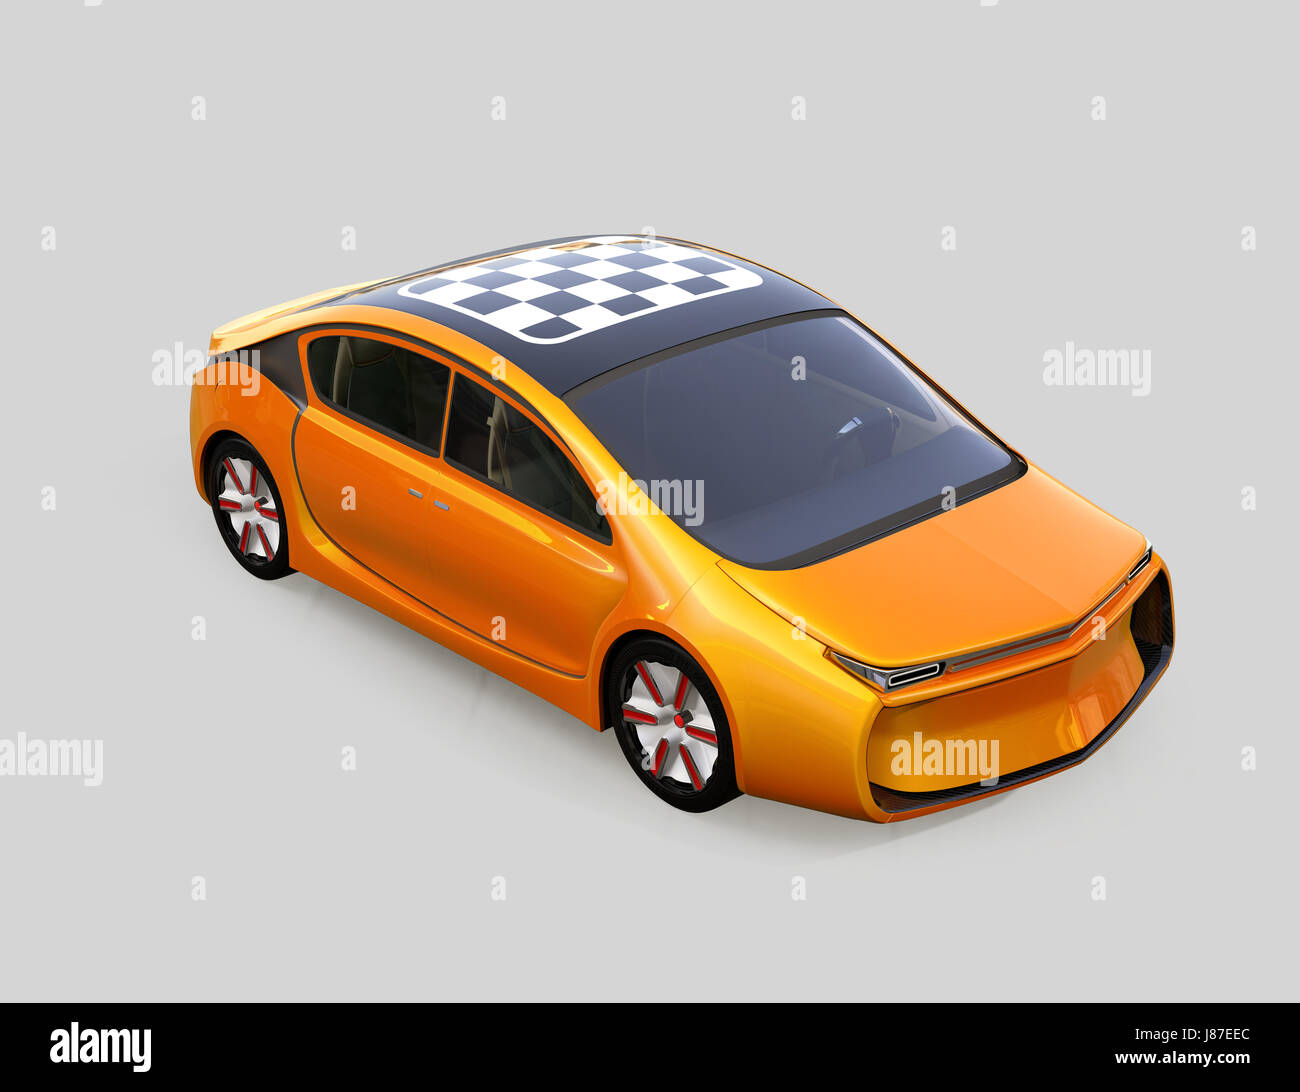 Orange electric car isolated on gray background. 3D rendering image. Stock Photo